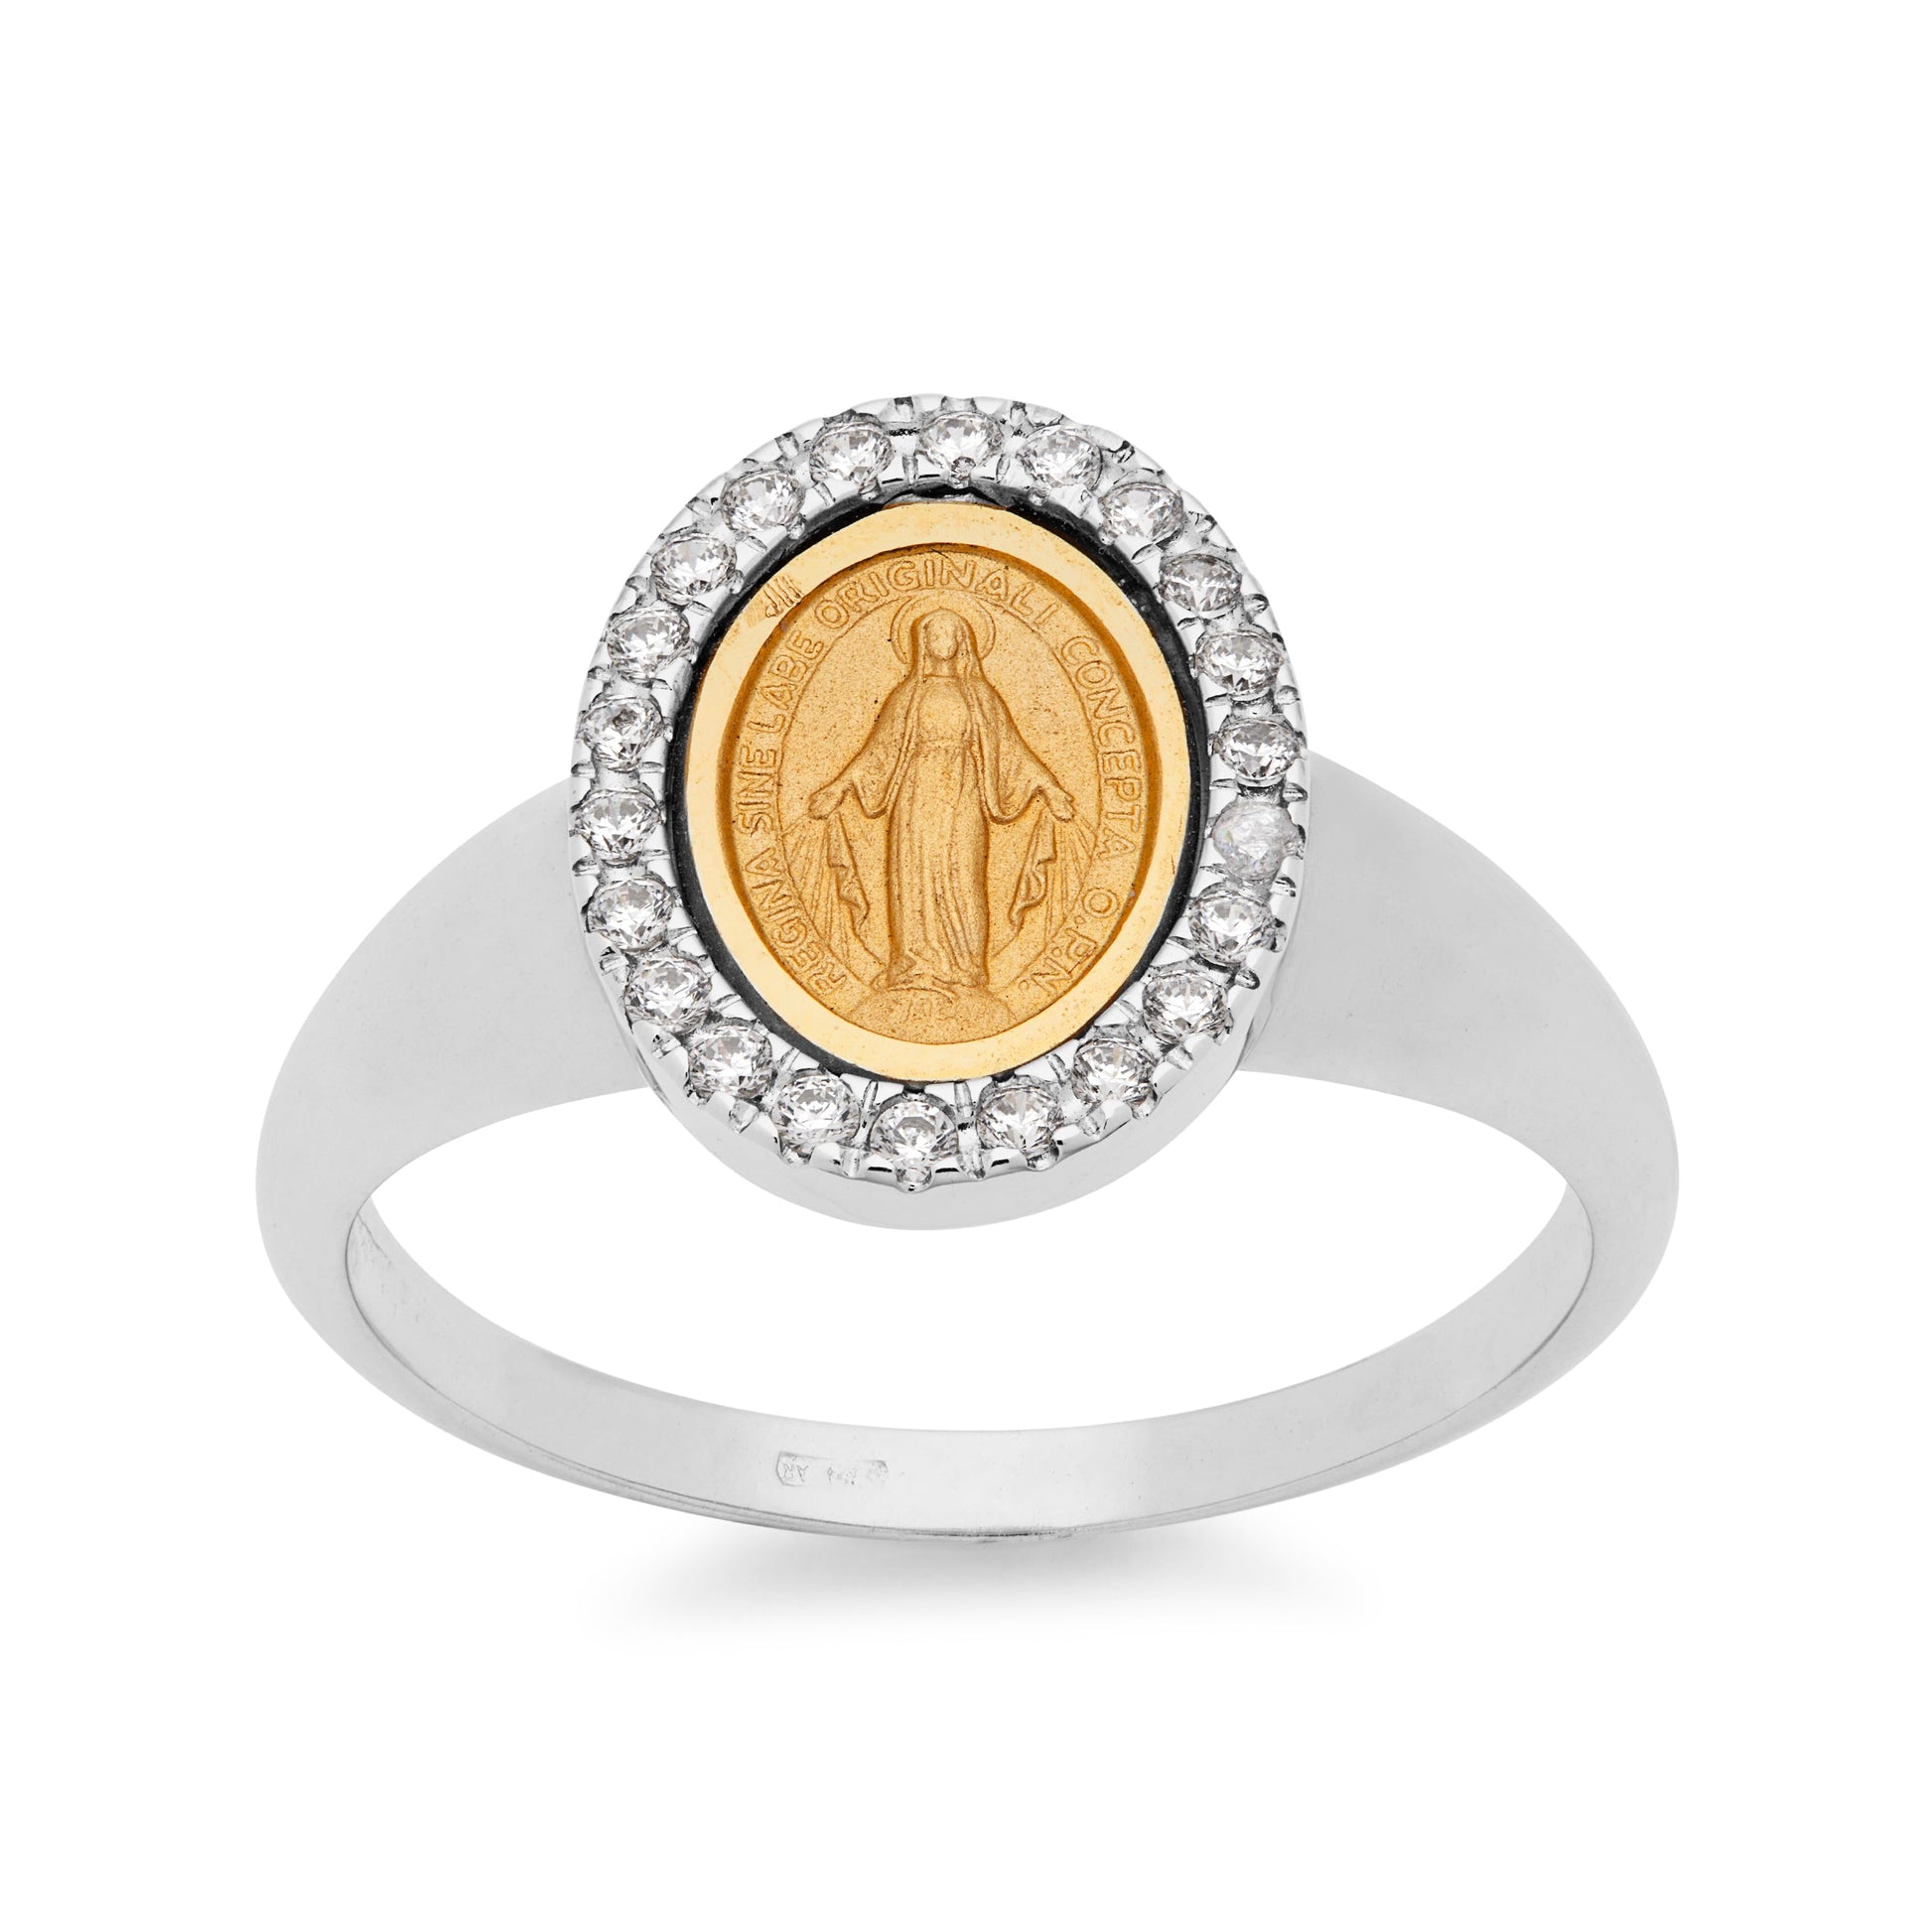 Mondo Cattolico 18.47 mm (0.73 in) White Gold Ring With Miraculous Medal in Gold and Cubic Zirconia Details